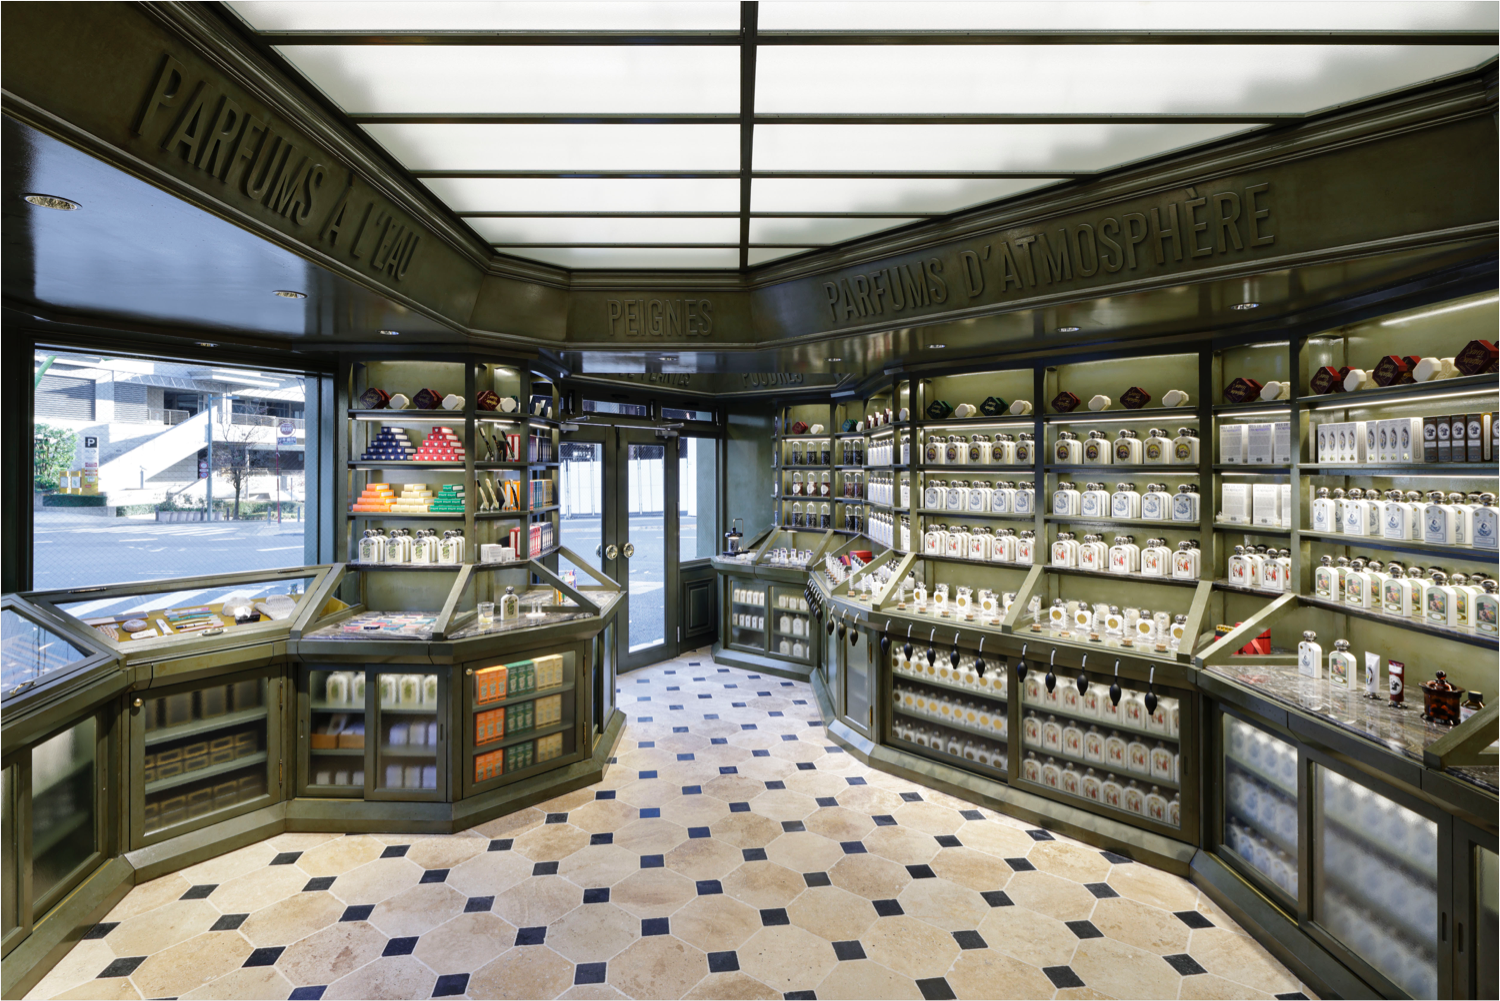 Tokyo: Officine Universelle Buly store opening